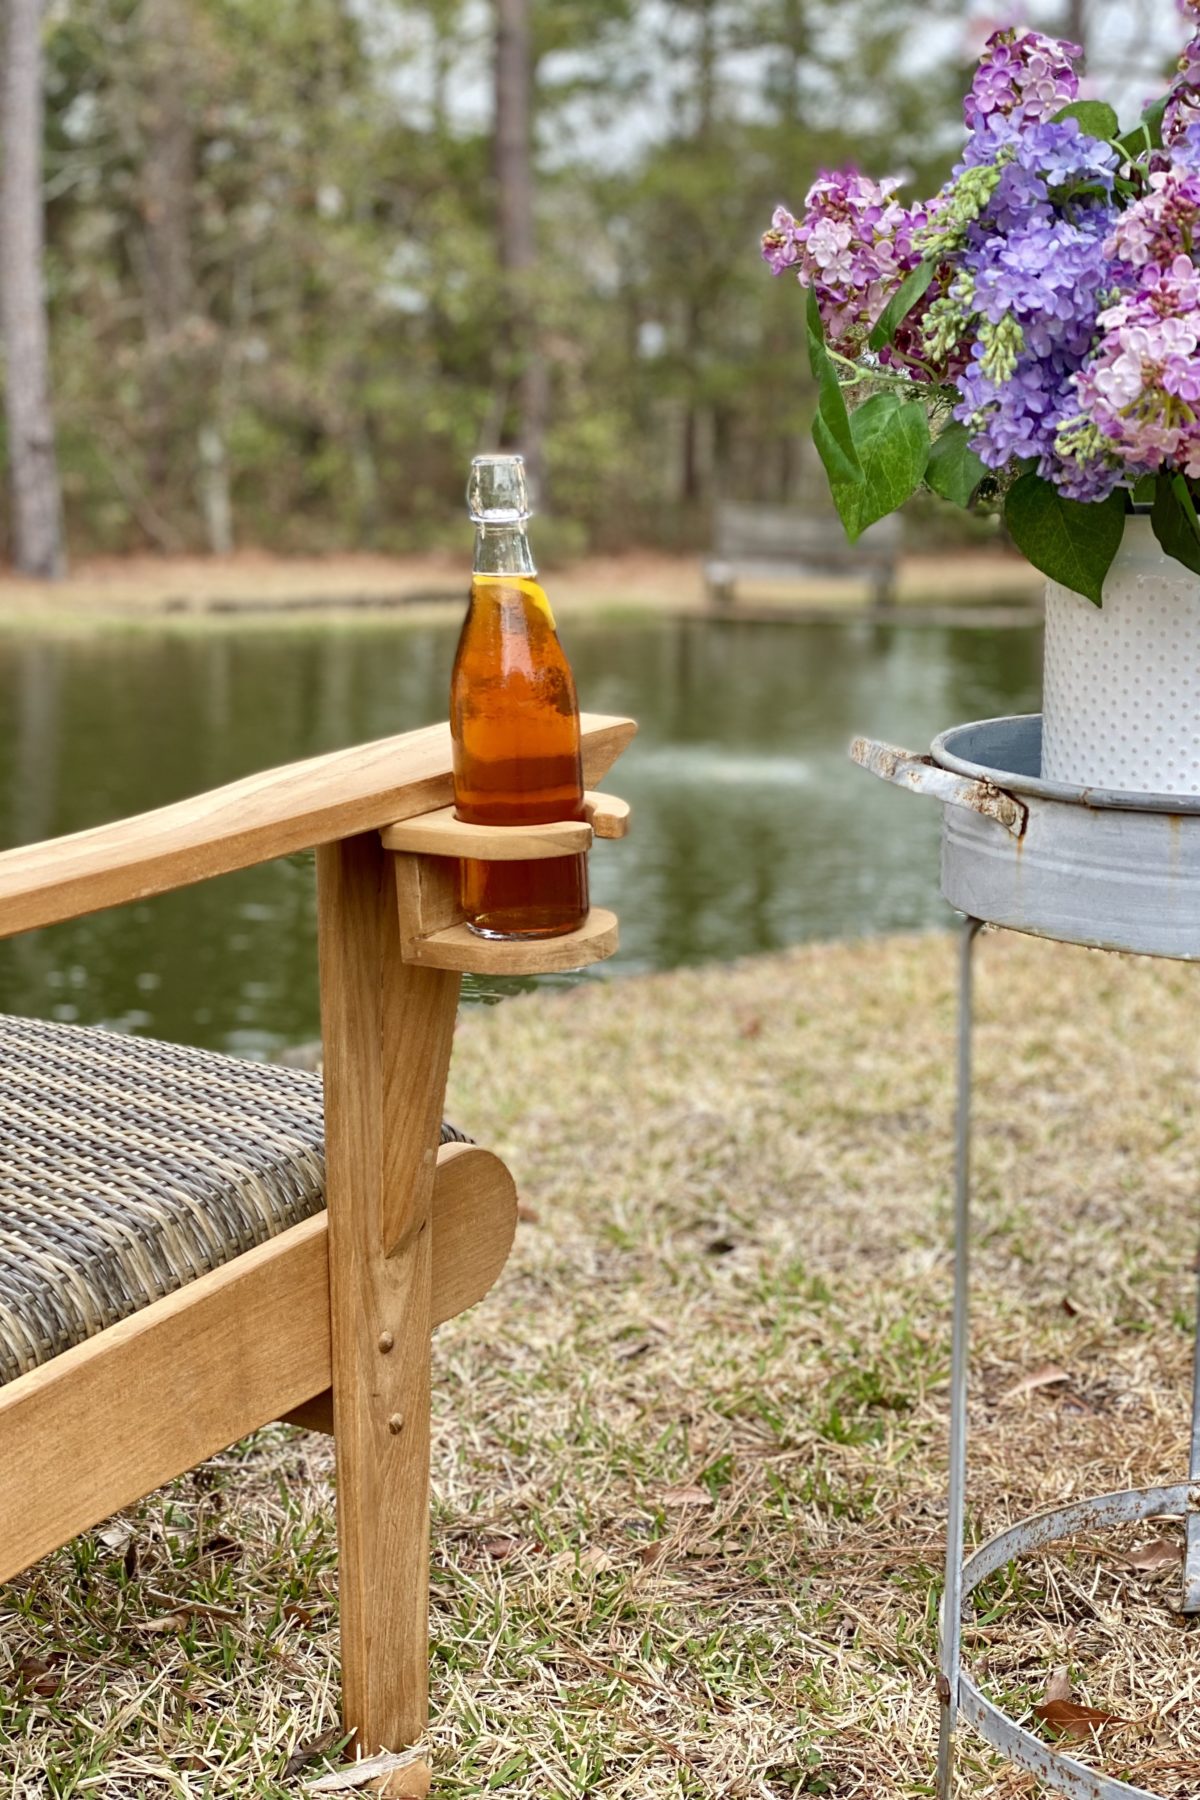 A glass bottle of beer in the bottle holder attached to the arm of the Adirondack chair. The pond is in the background.